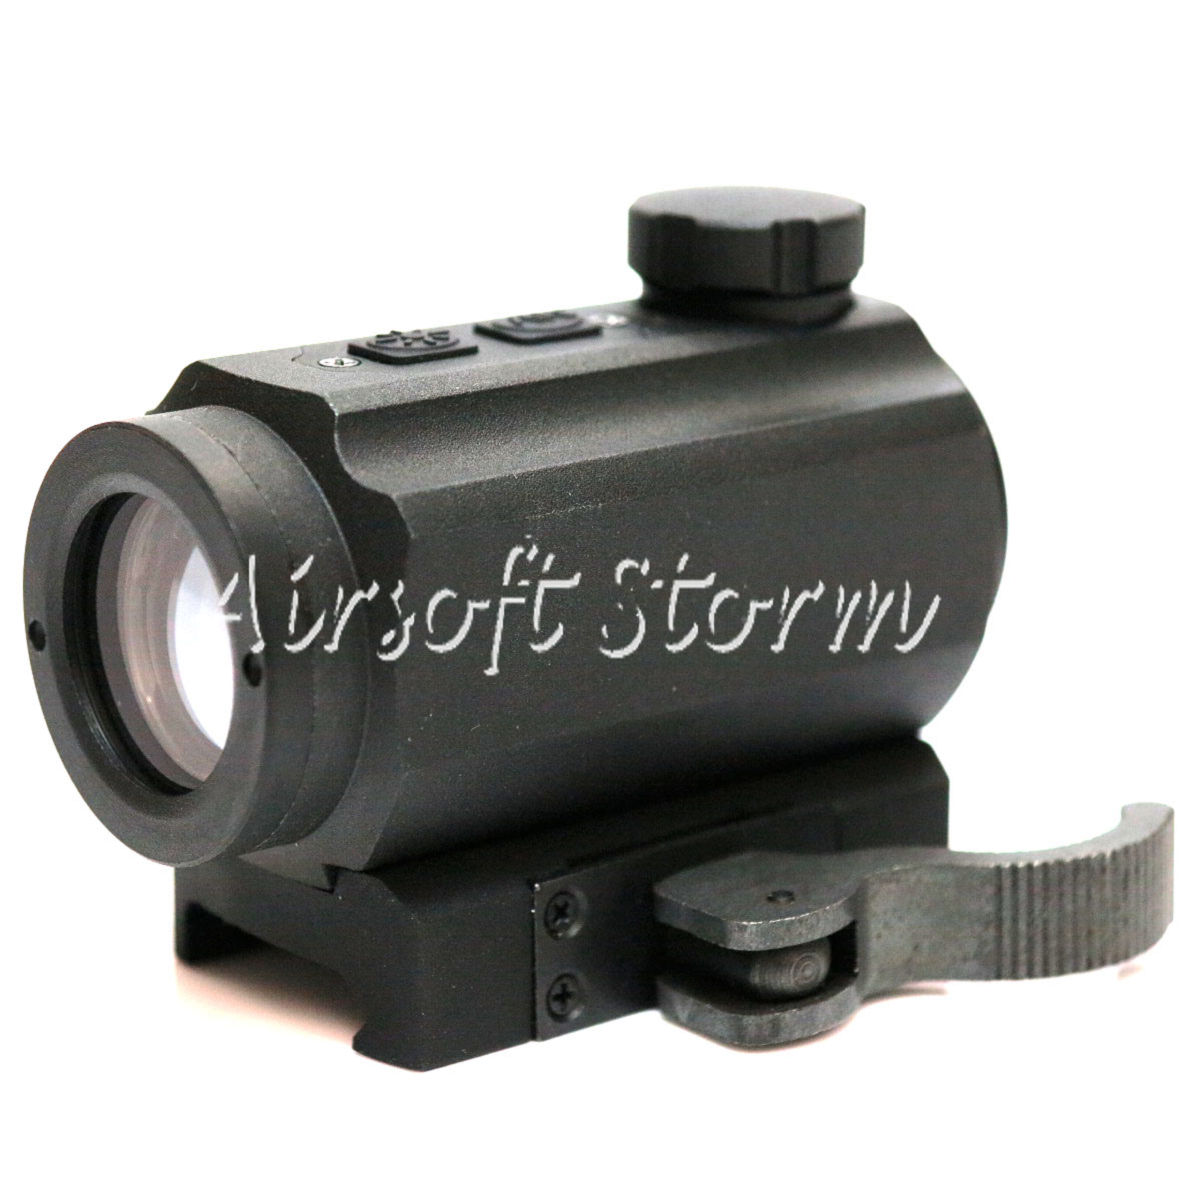 SWAT Gear Tactical 1x20 Micro T-1 Red Green Dot Sight Scope with QD Low Mount